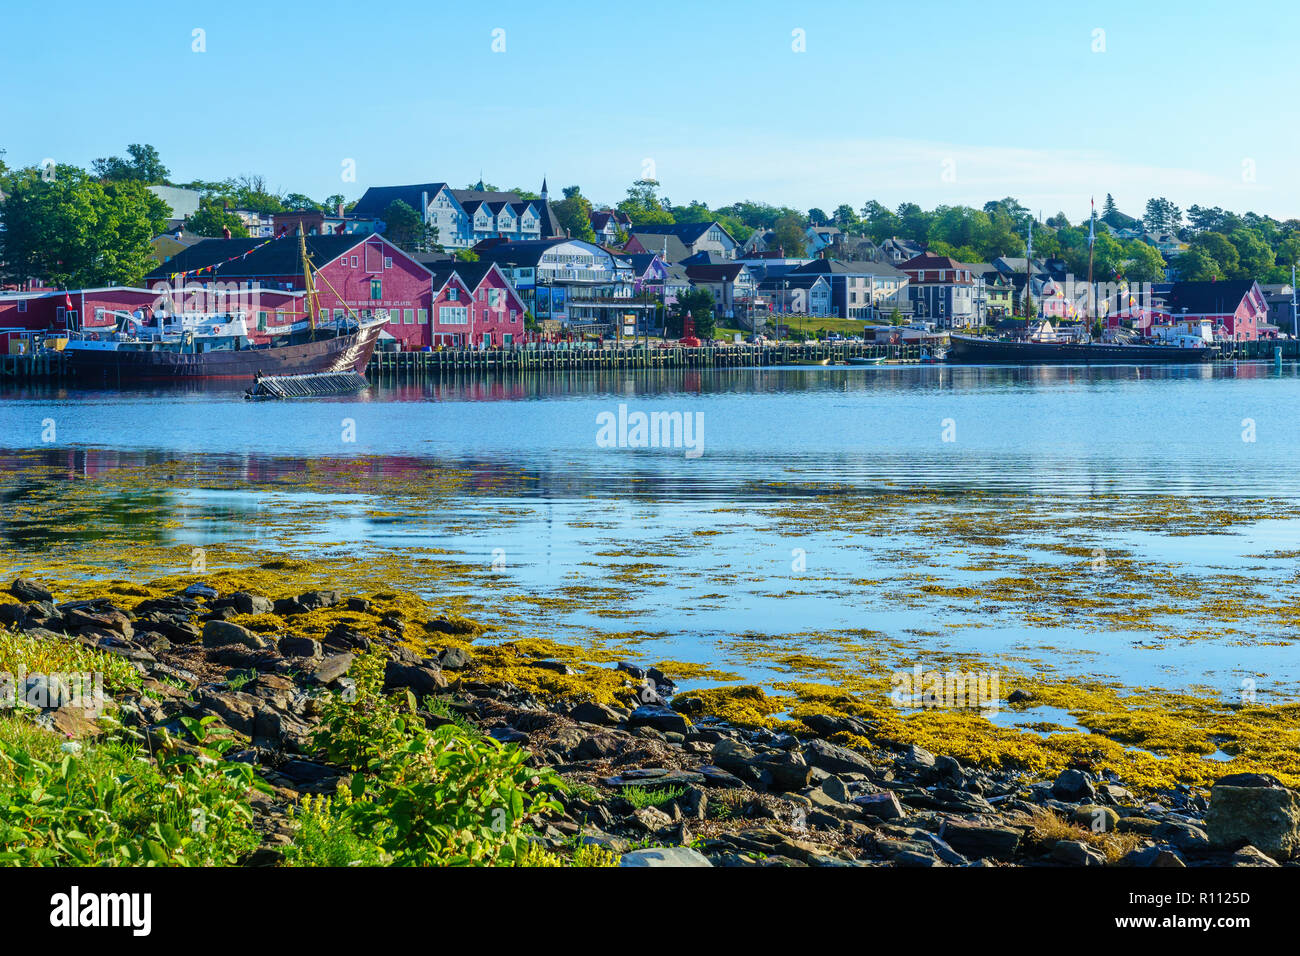 Lunenburg, Canada - September 21, 2018: Morning view of the waterfront and port of the historic town Lunenburg, Nova Scotia, Canada Stock Photo